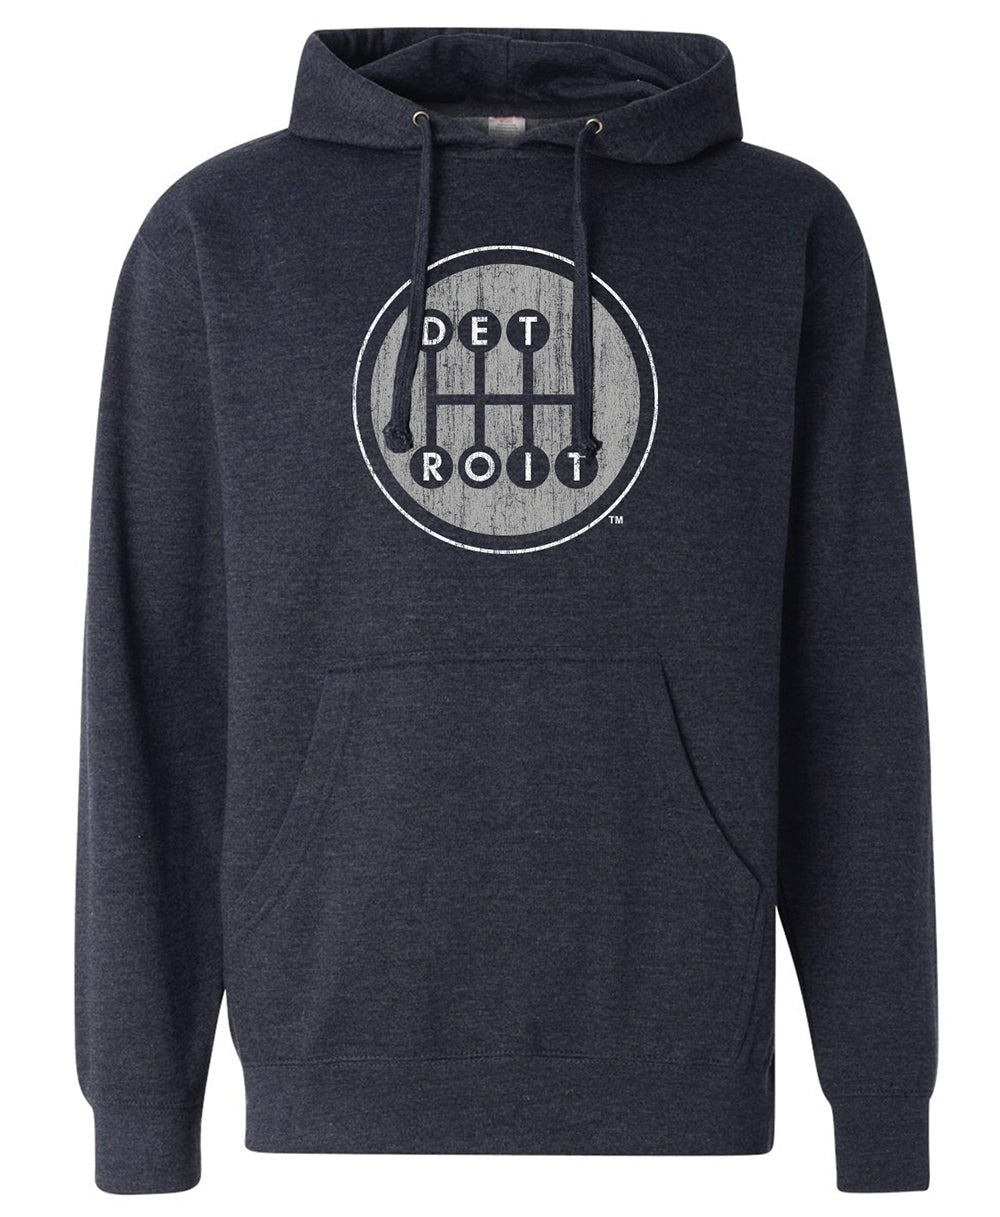 Heather Navy Pullover Hoodie with Detroit Shifter Print in Grey and White